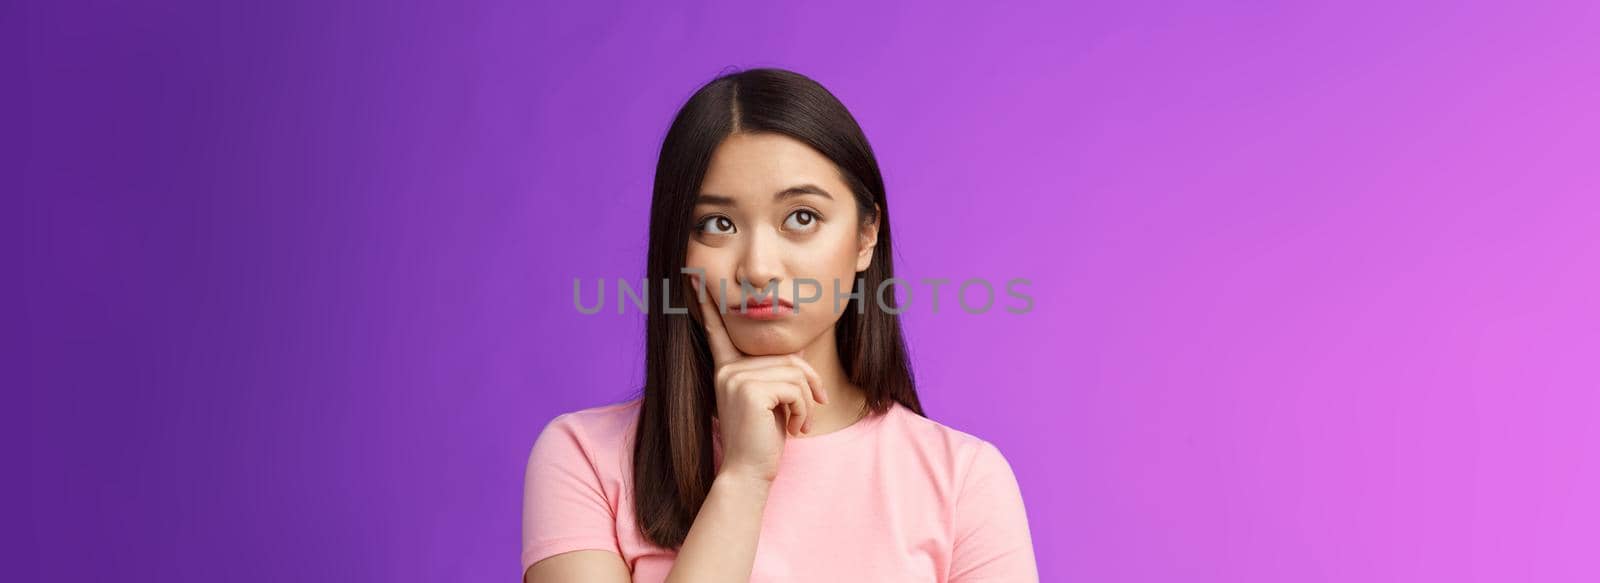 Creative dreamy asian female thinking, have tough decision mind, touch cheek thoughtful, look up, pondering making choice, stand hesitant sighing troublesome thoughts, stand purple background.